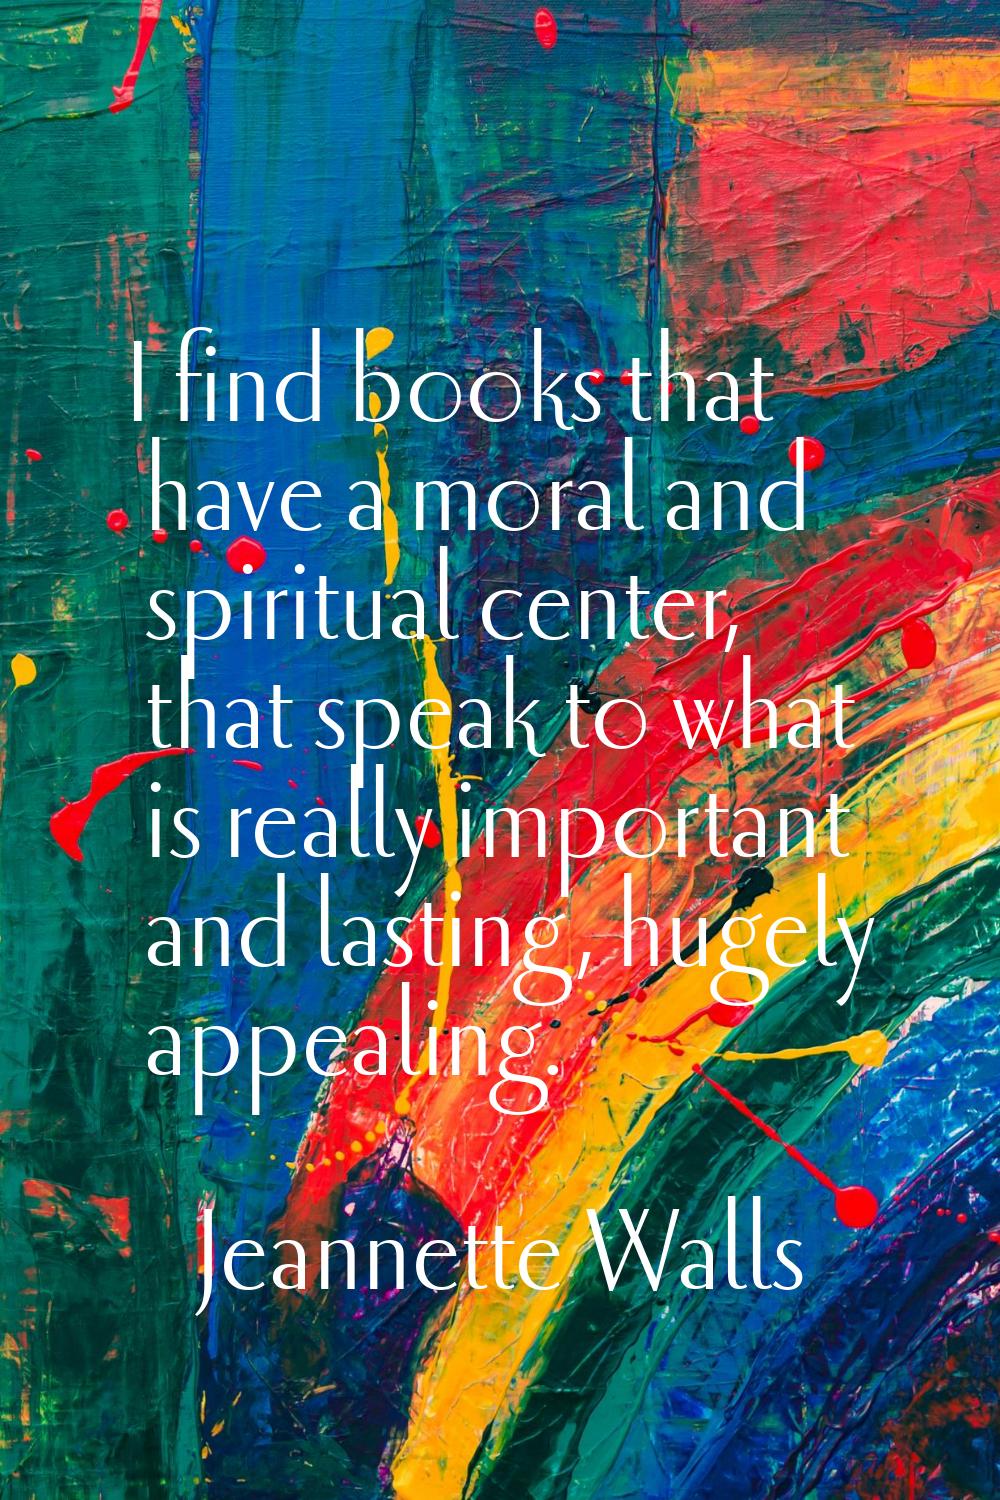 I find books that have a moral and spiritual center, that speak to what is really important and las